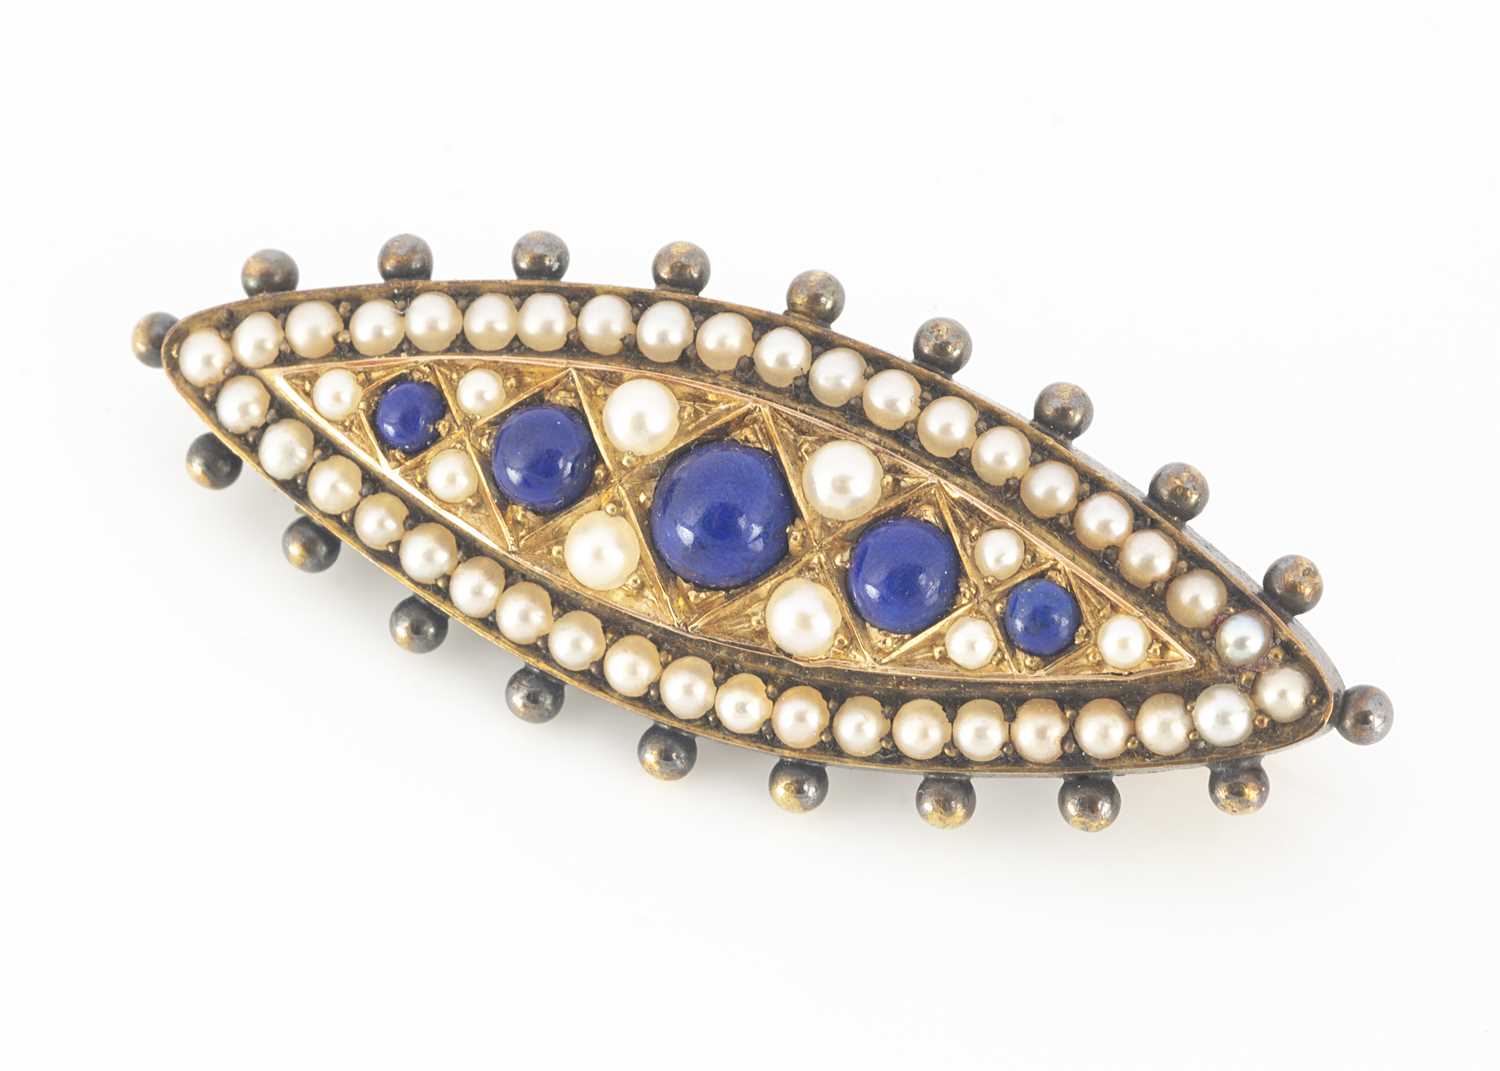 Lot 2 - A continental navette shaped brooch